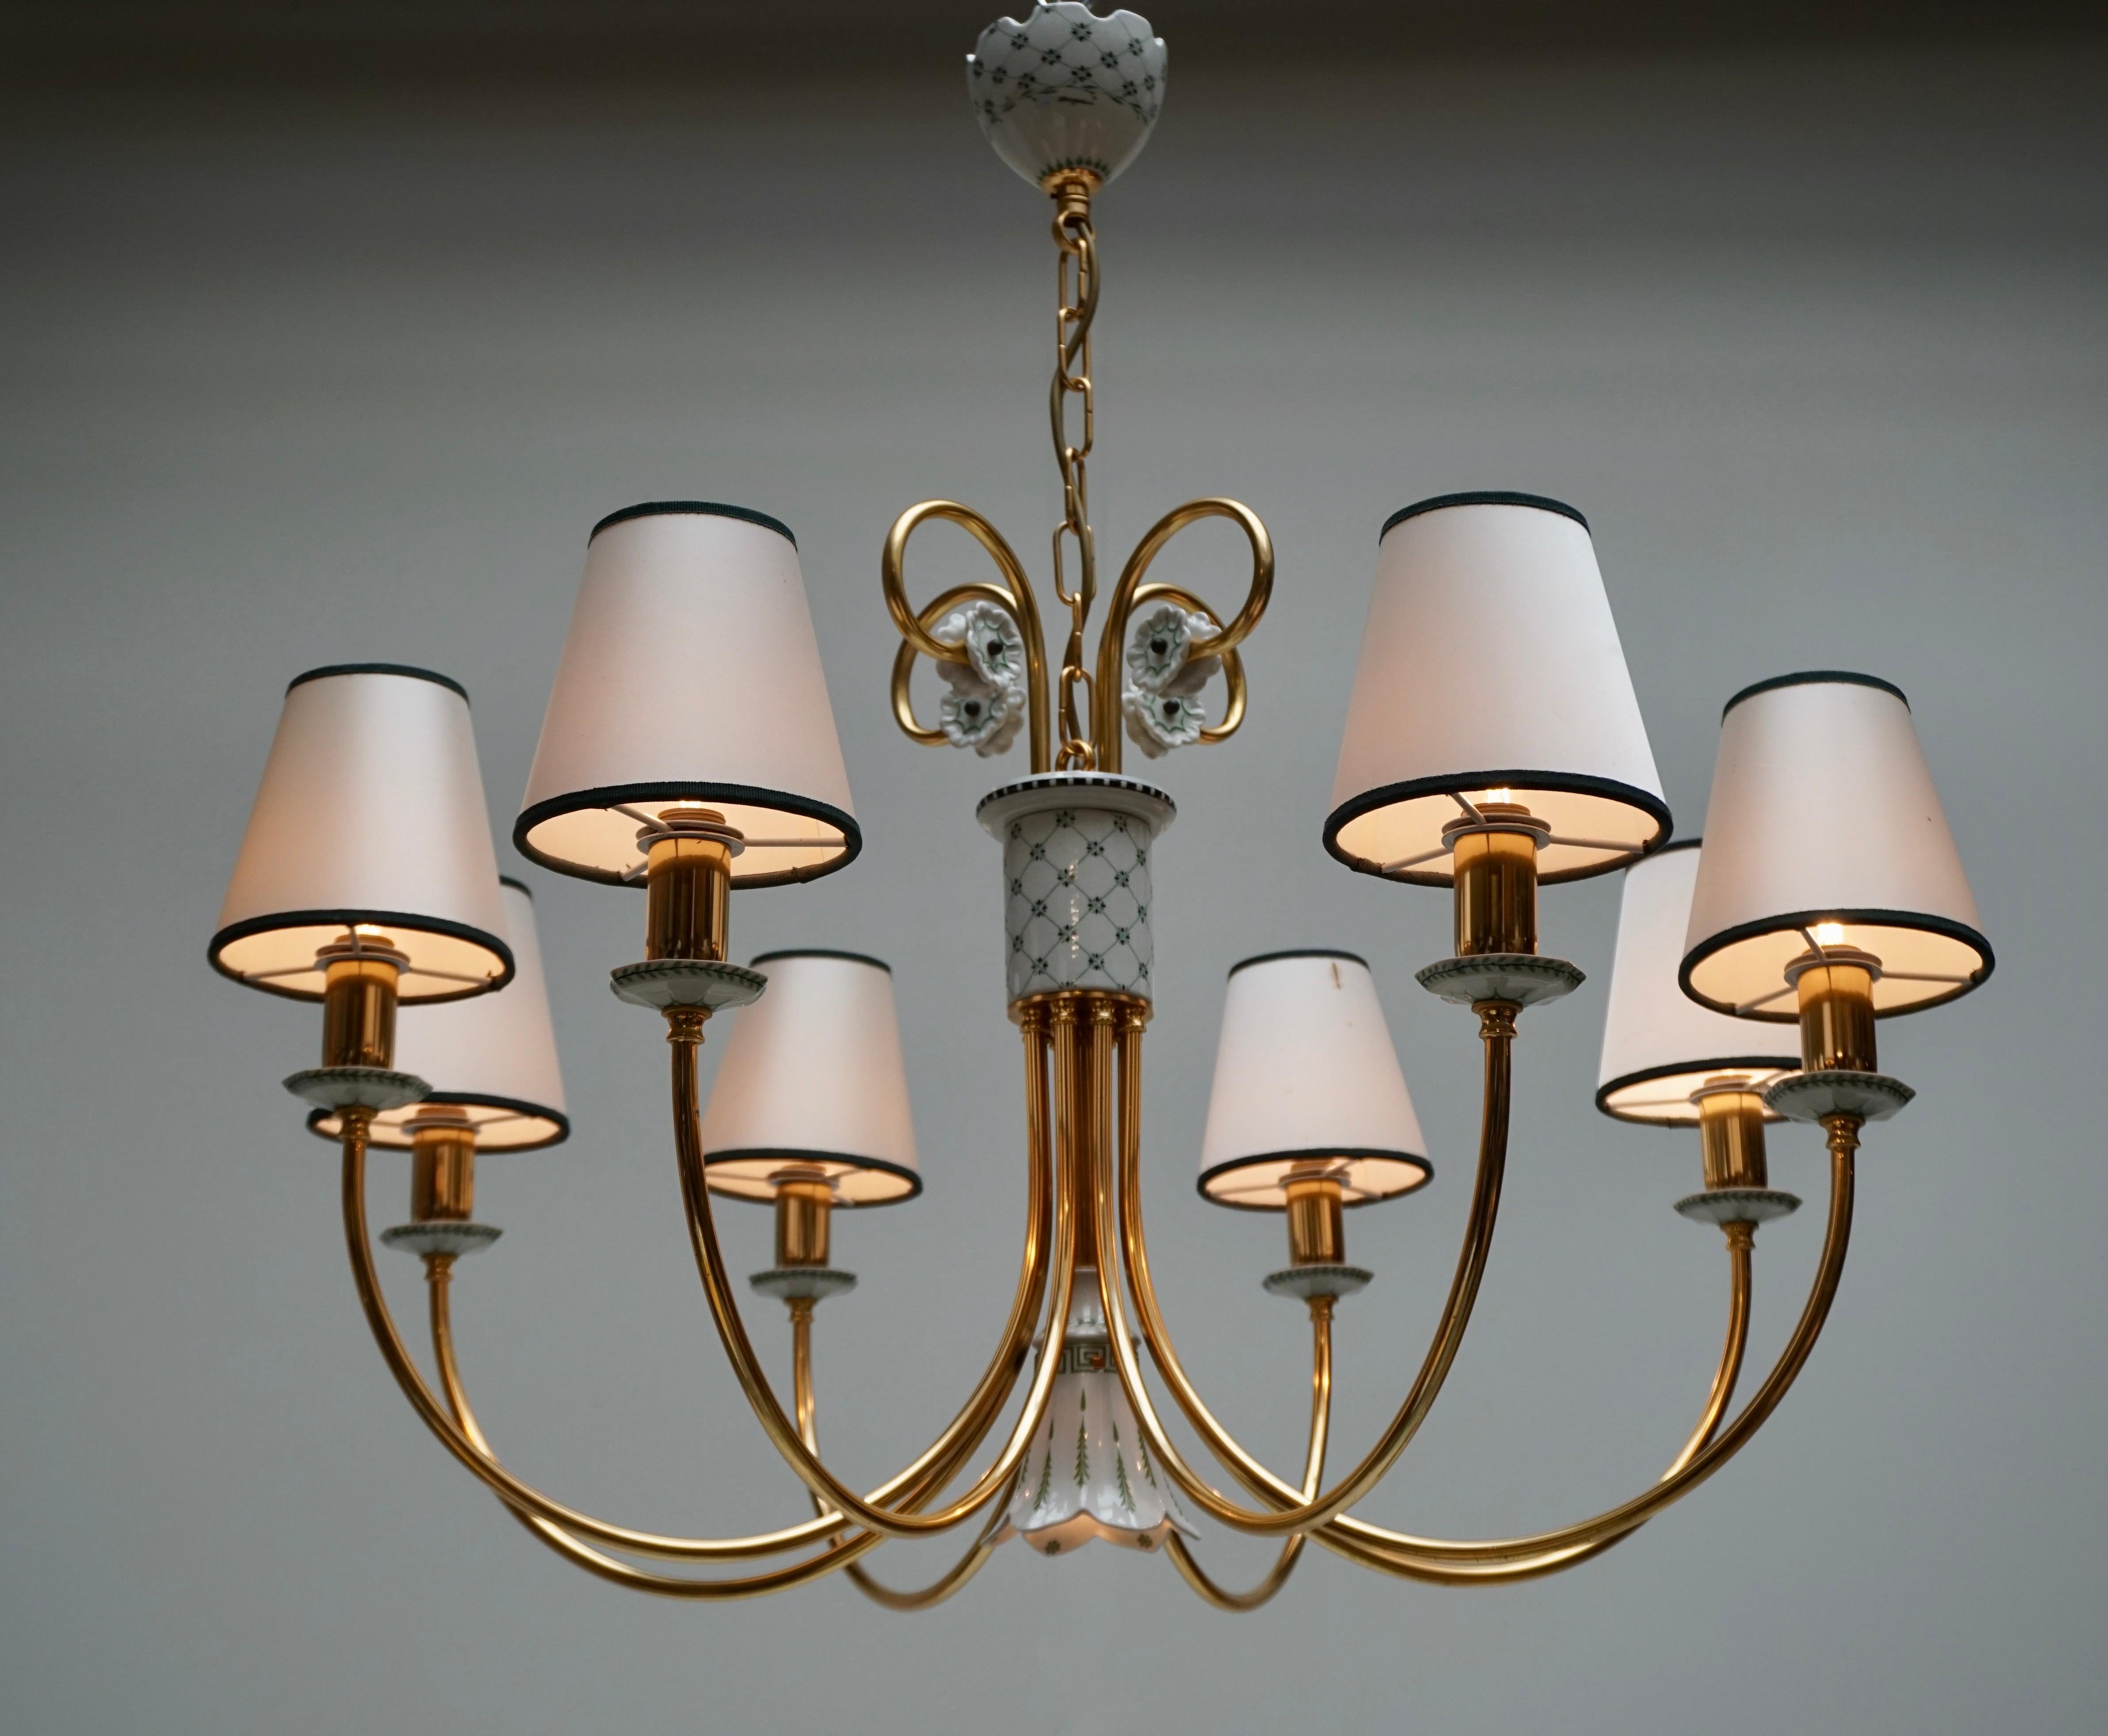 Giulia Mangani Porcelain Chandelier Italy Florence In Good Condition For Sale In Antwerp, BE